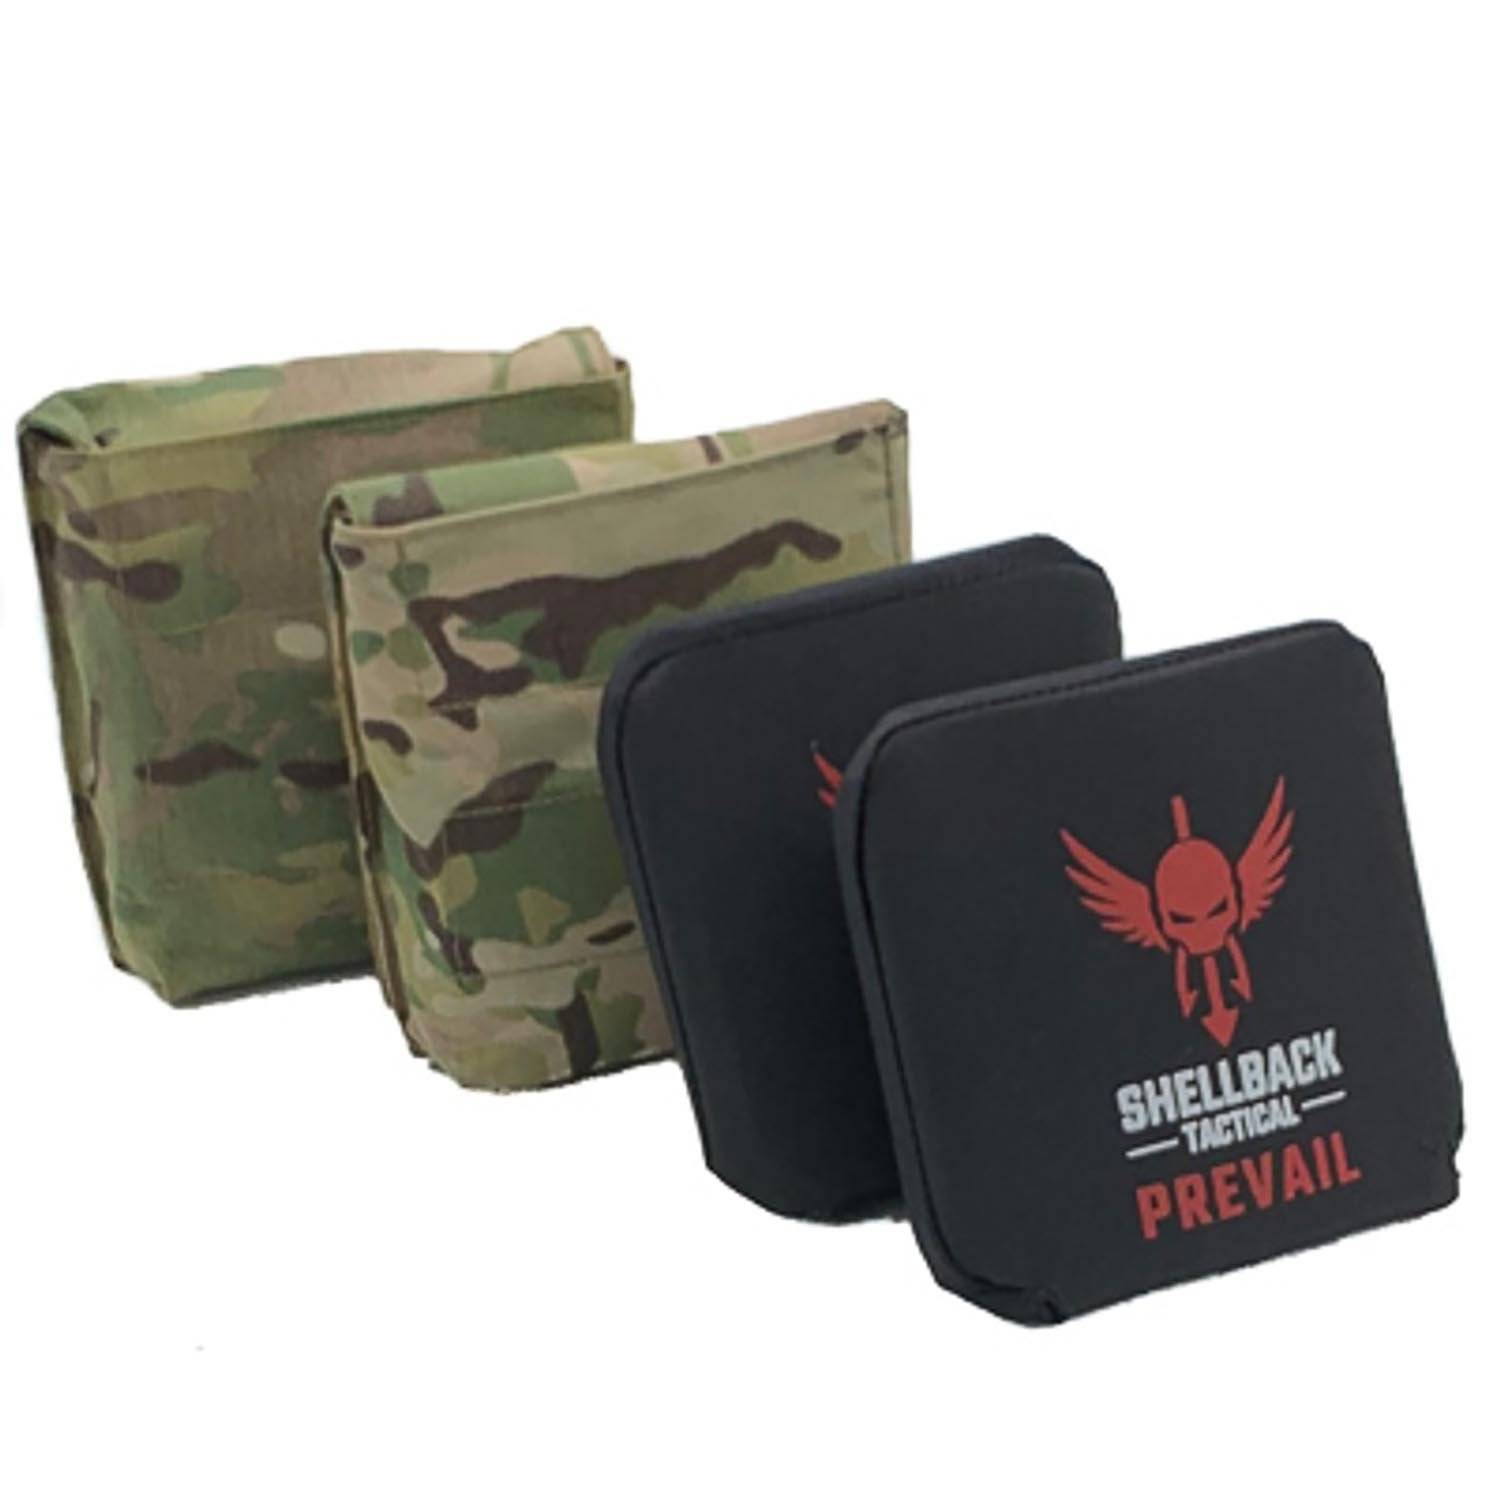 Shellback Tactical Side Armor Plate Kit with Level IV 4S17